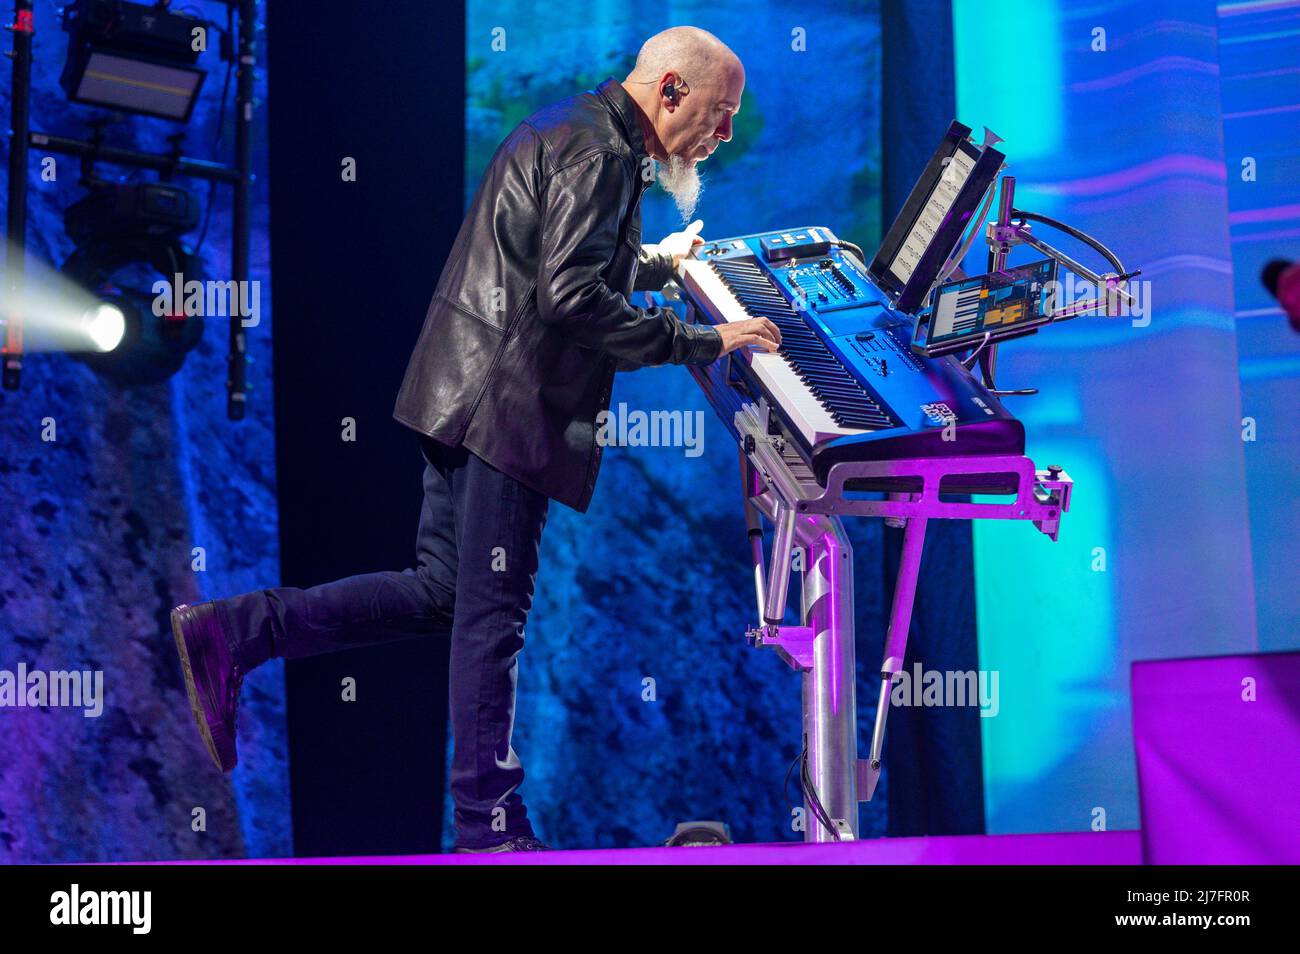 Jordan Rudess – guitar, keytar, continuum during the Music Concert Dream Theater - Top of the World Tour on May 08, 2022 at the Kioene Arena in Padova, Italy (Photo by Alessio Marini/LiveMedia/Sipa USA) Stock Photo